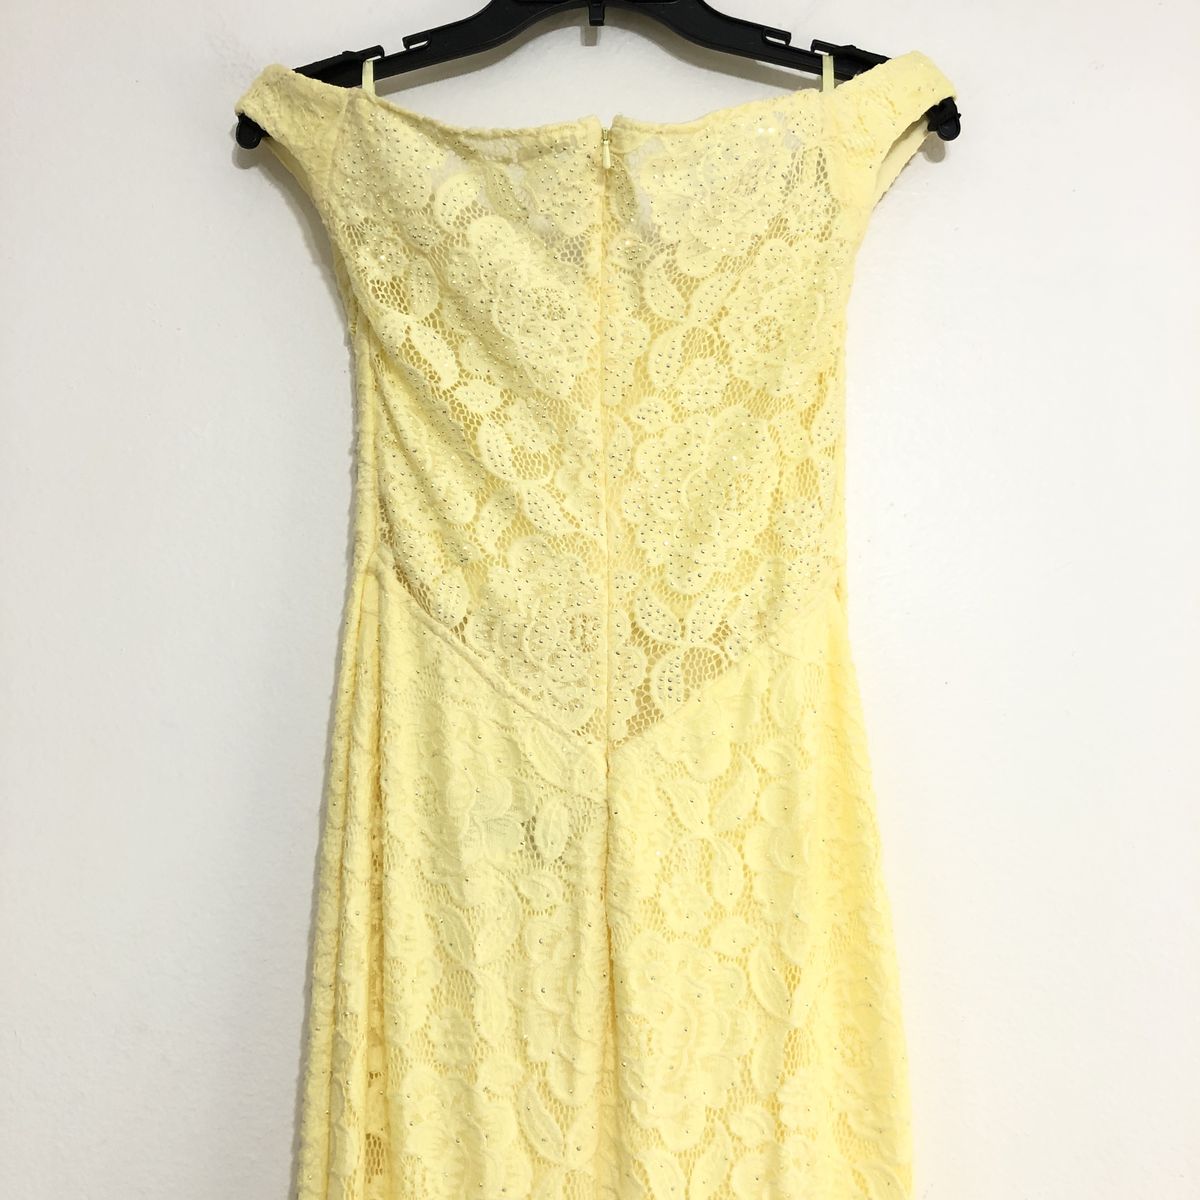 Style 28301 La Femme Size 4 Prom Off The Shoulder Lace Yellow Side Slit Dress on Queenly